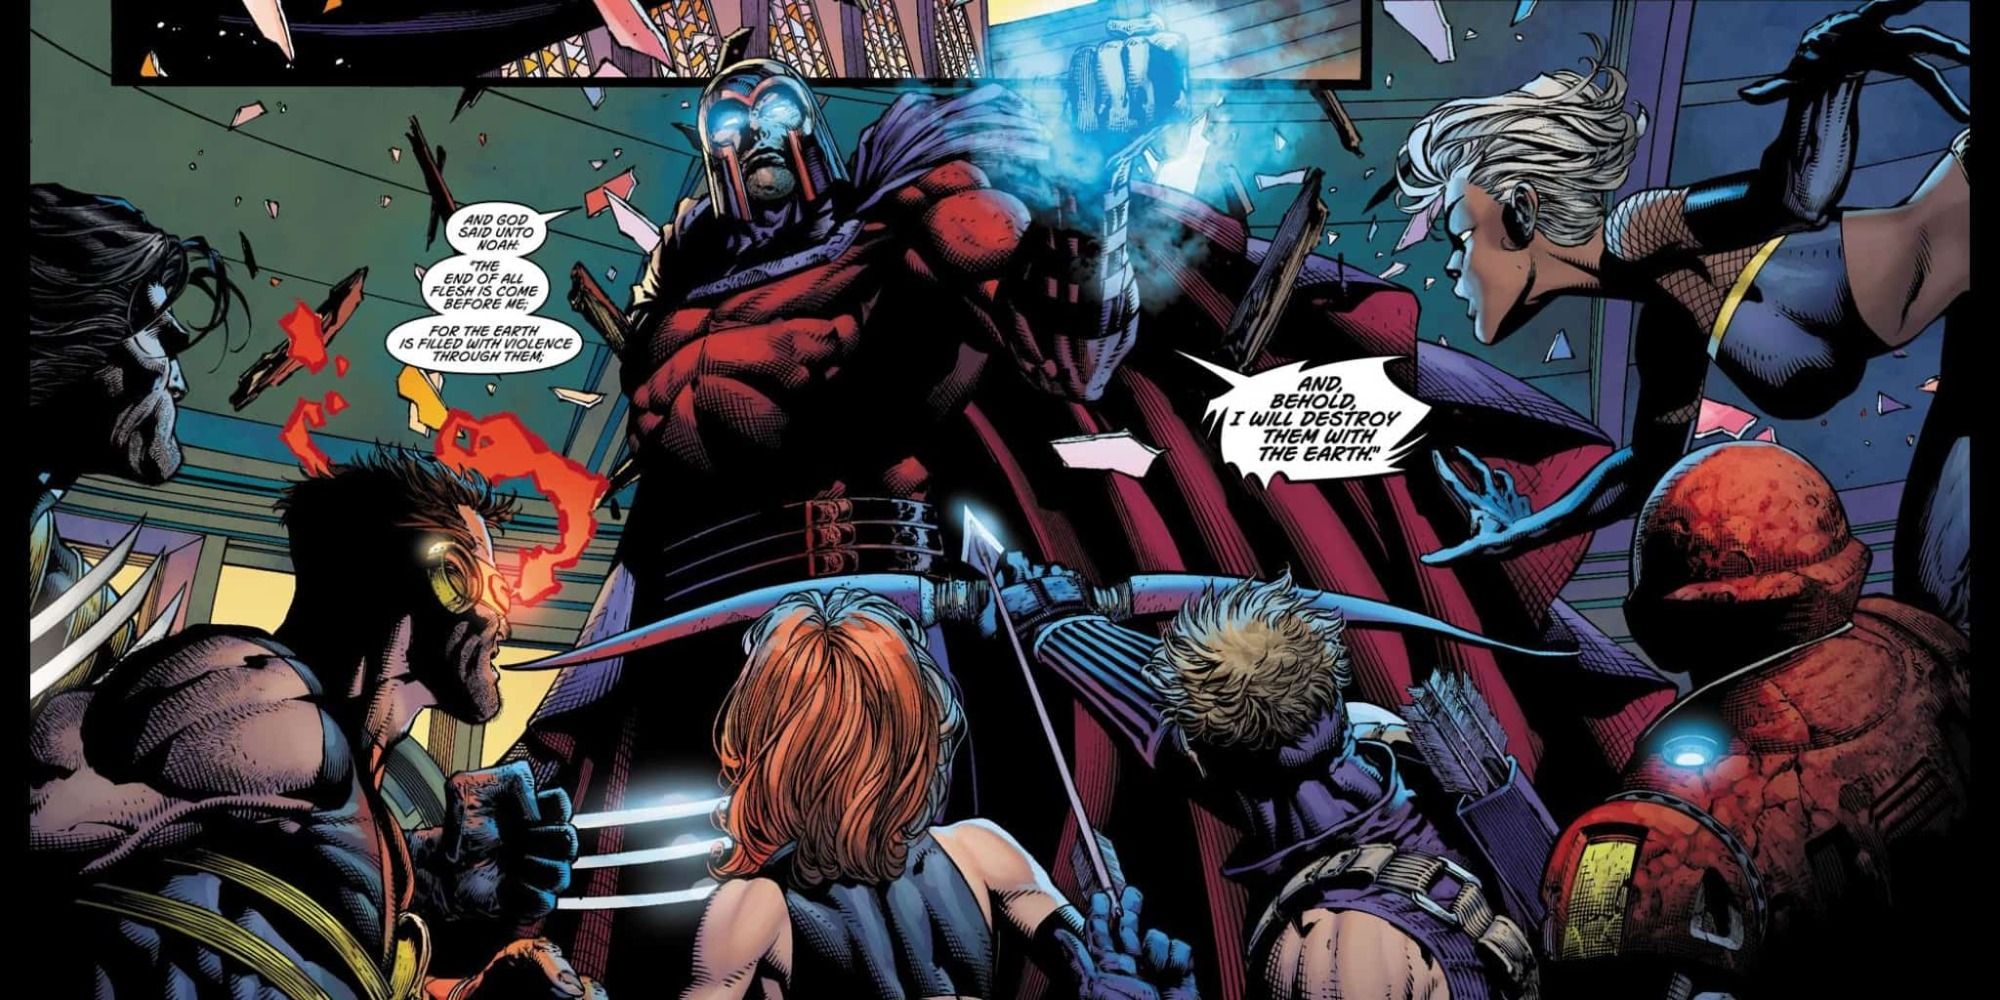 Magneto confronts the Avengers and X-Men in Ultimate Comics.